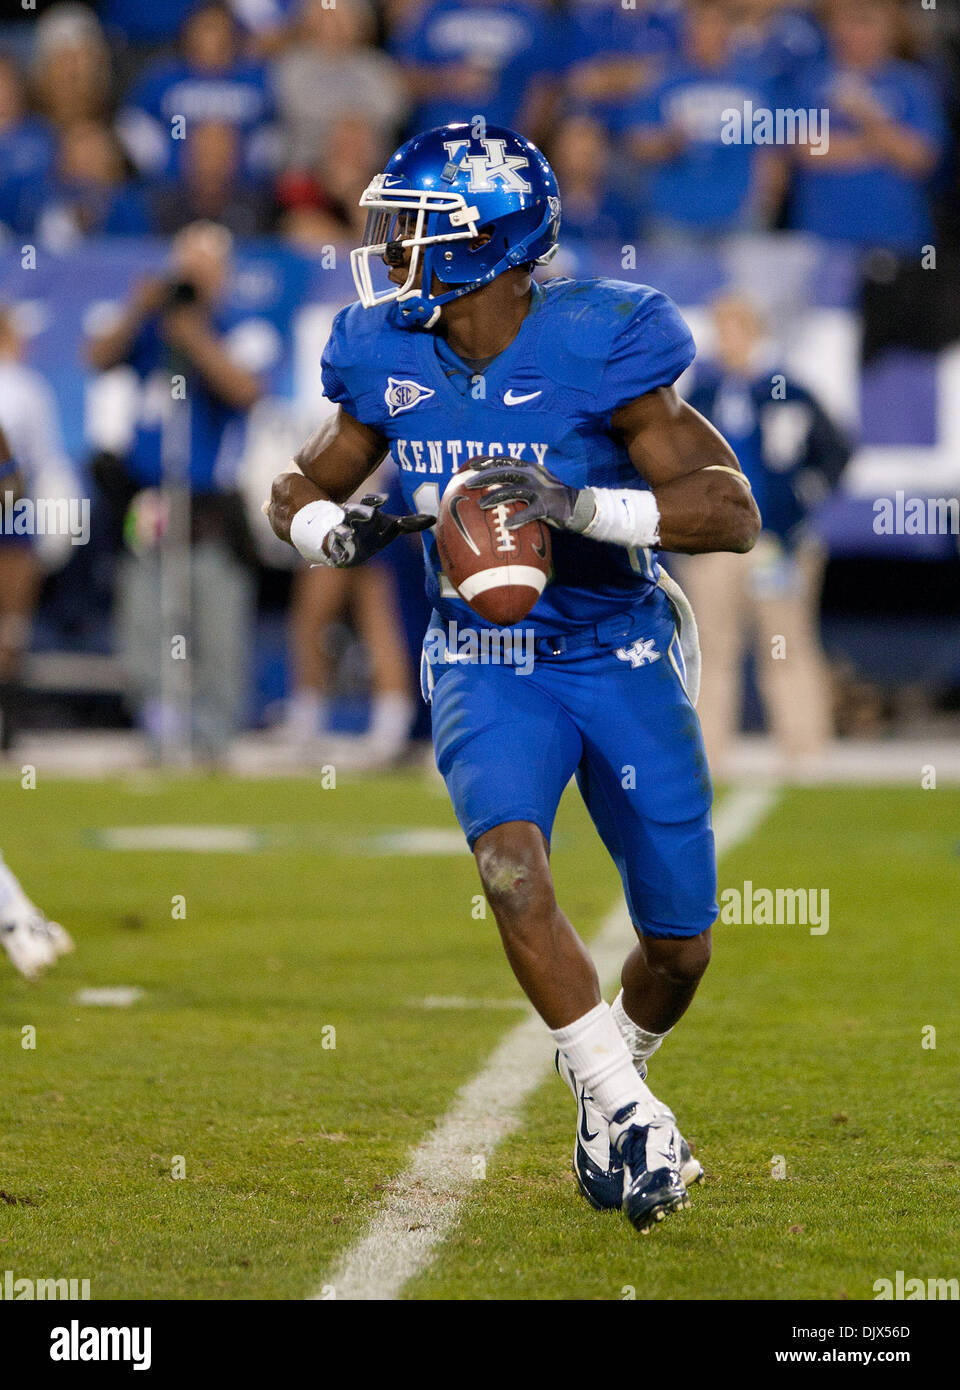 Oct. 23, 2010 - Lexington, Kentucky, United States of America - Kentucky wide receiver/quarterback Randall Cobb (18) throws a pass for a two point conversion in second half action vs Georgia  from  Commwealth Stadium in Lexington. Final score Georgia 44 Kentucky 25. (Credit Image: © Wayne Litmer/Southcreek Global/ZUMApress.com) Stock Photo